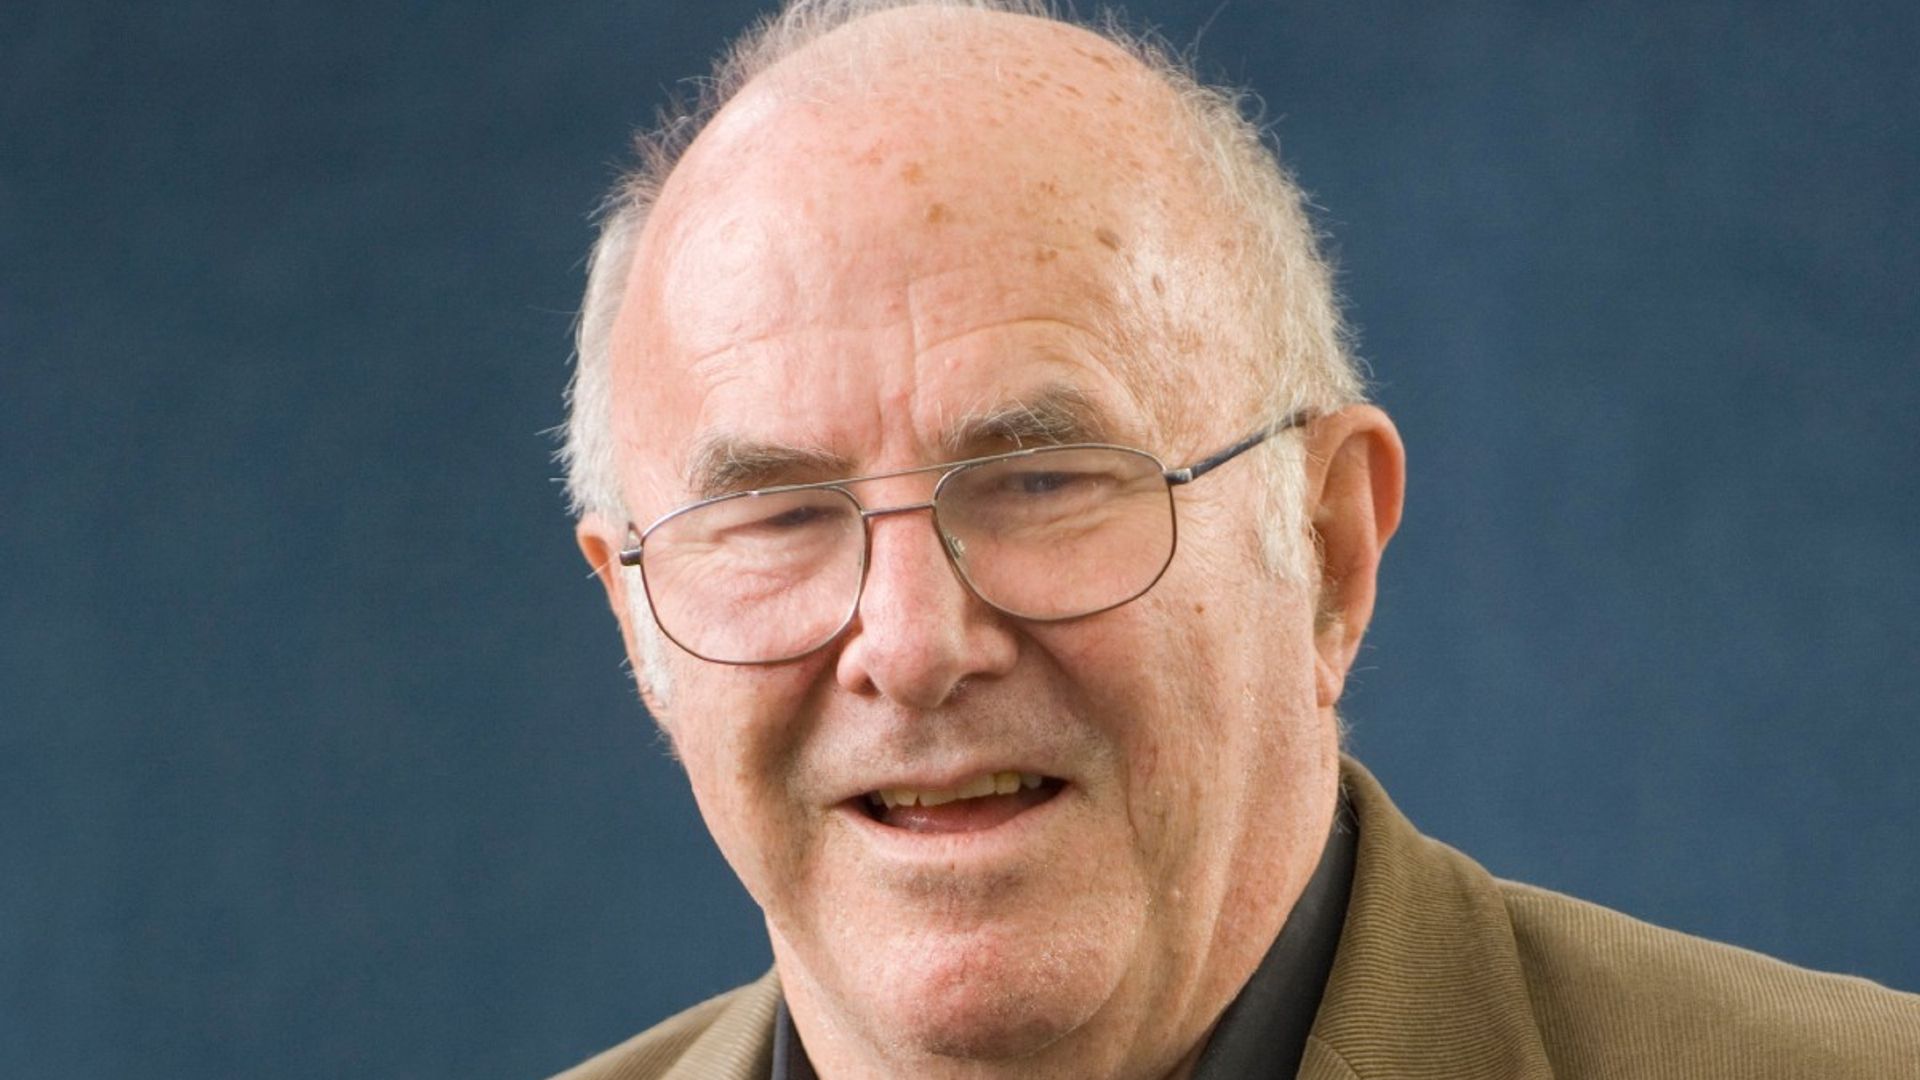 clive james open mouth